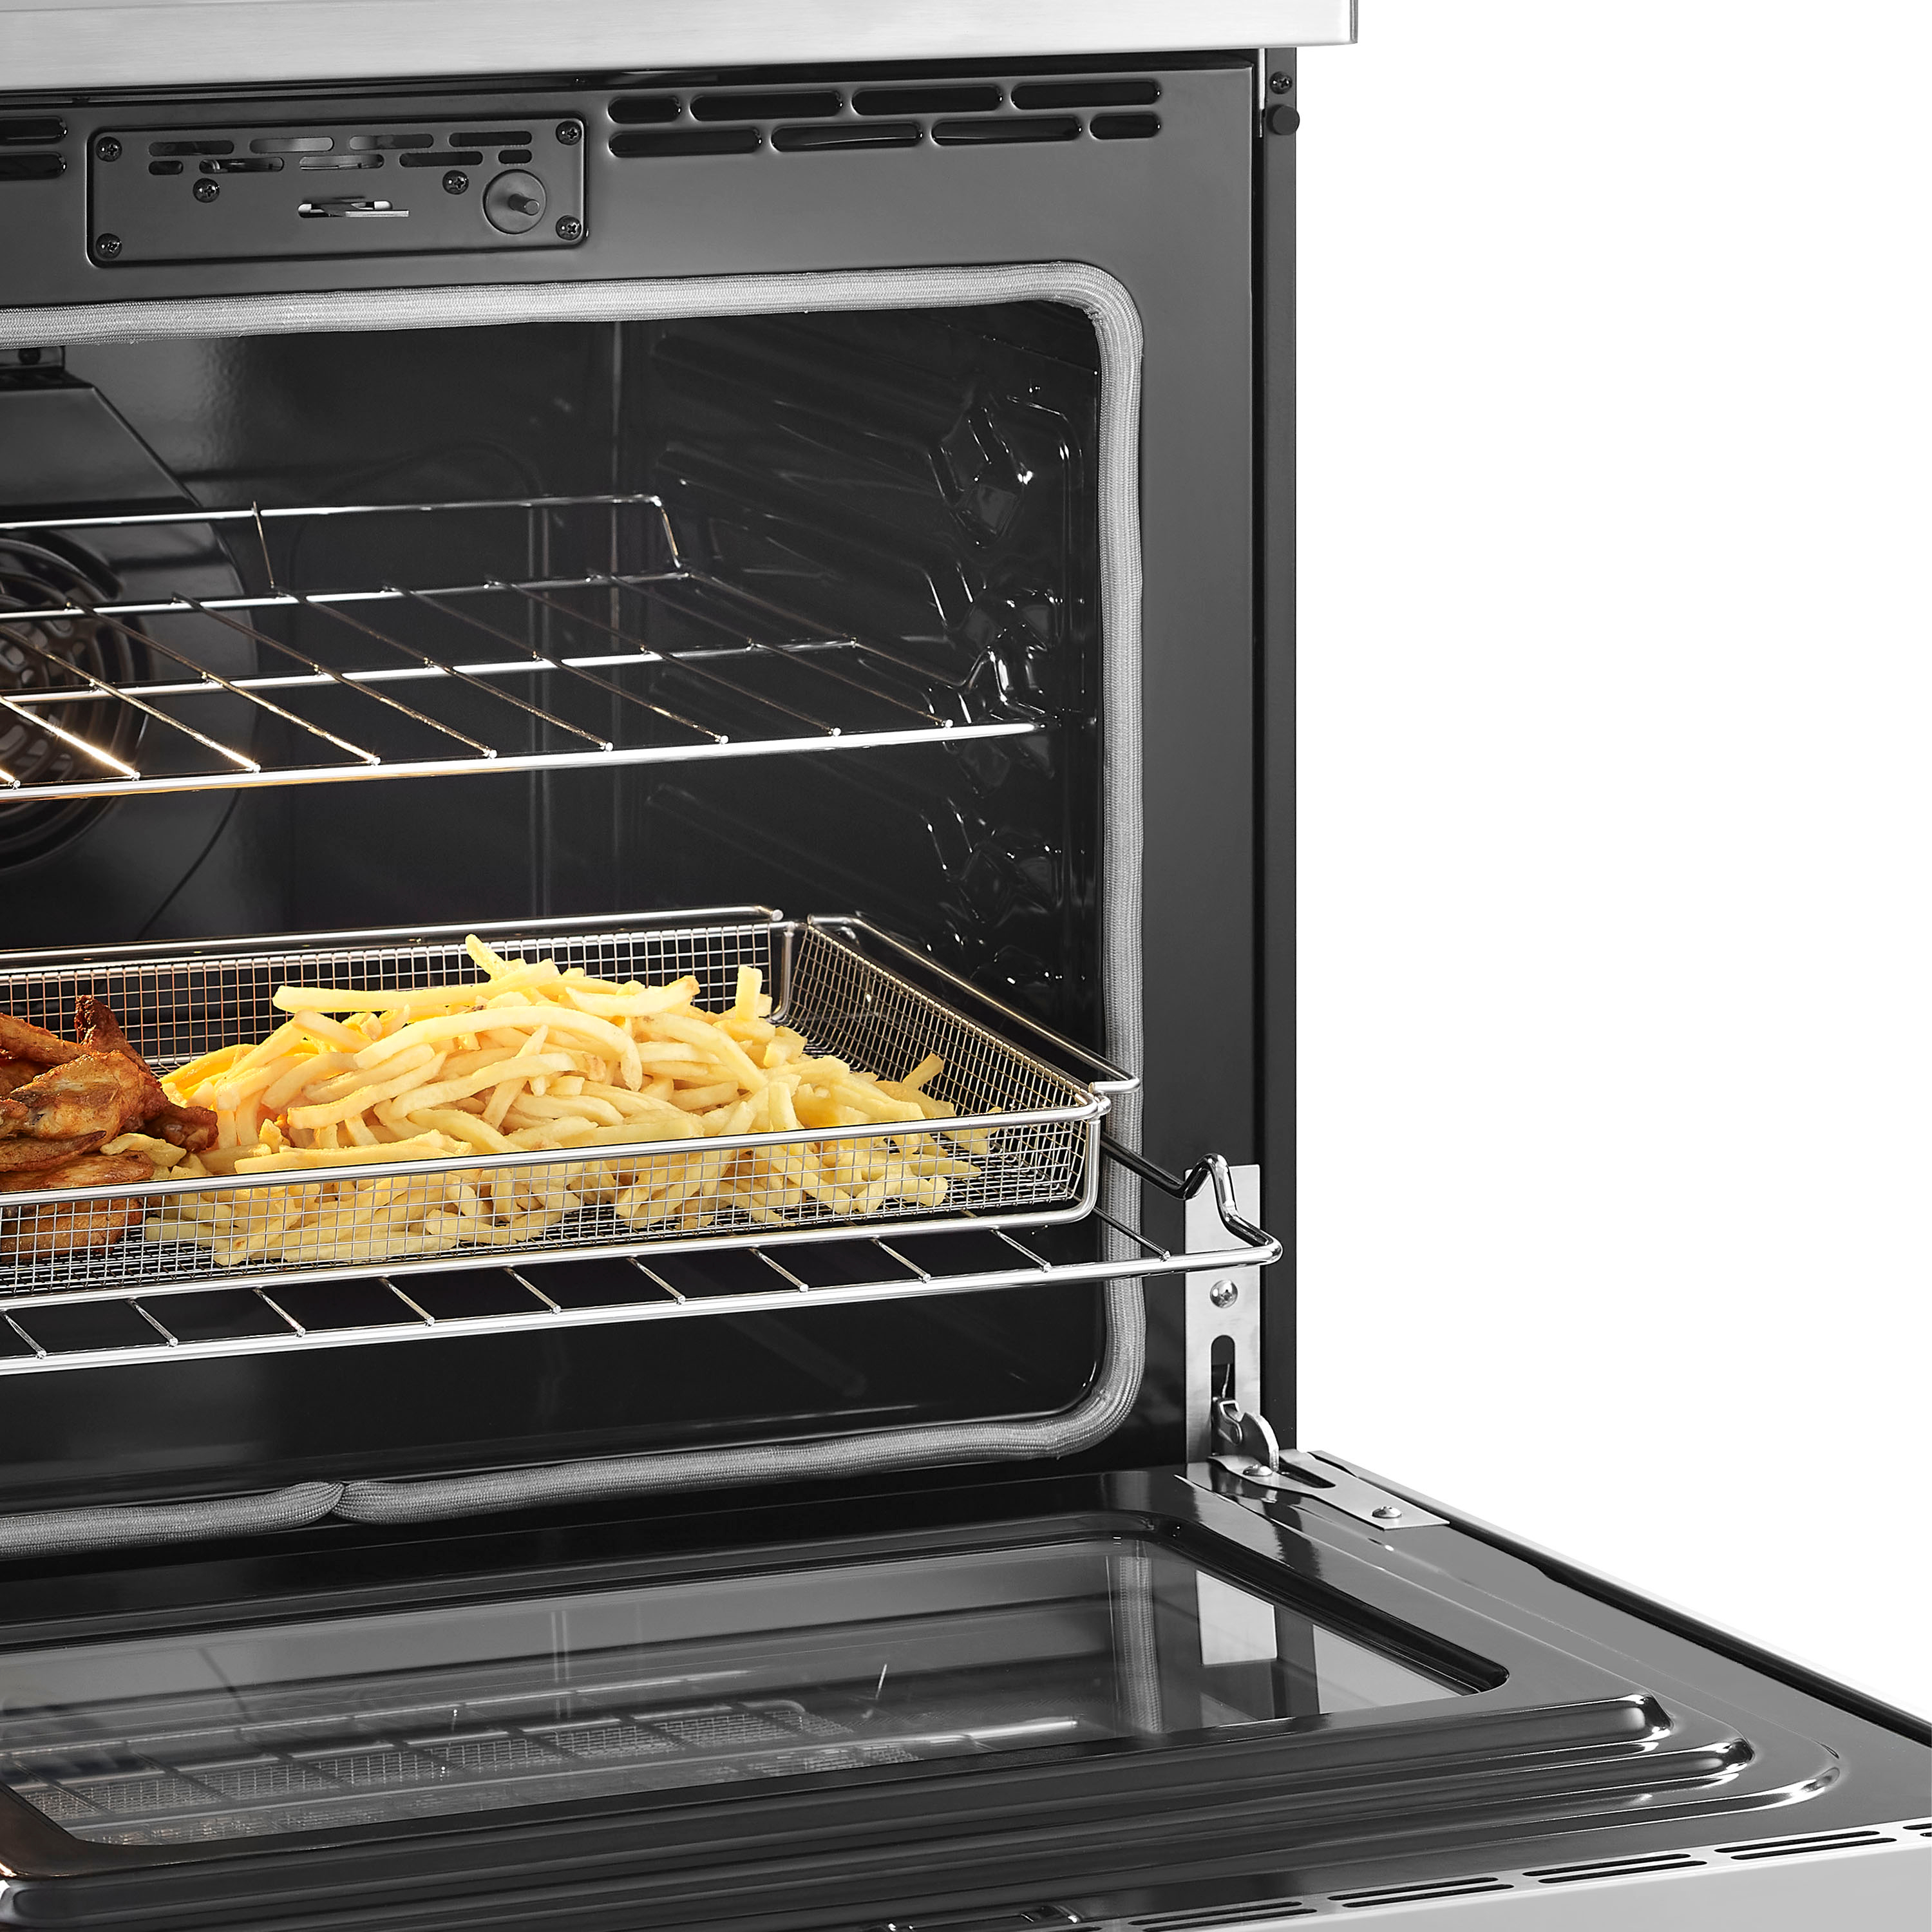 NeweggBusiness - DeLonghi EO1270 Silver Convection Toaster Oven